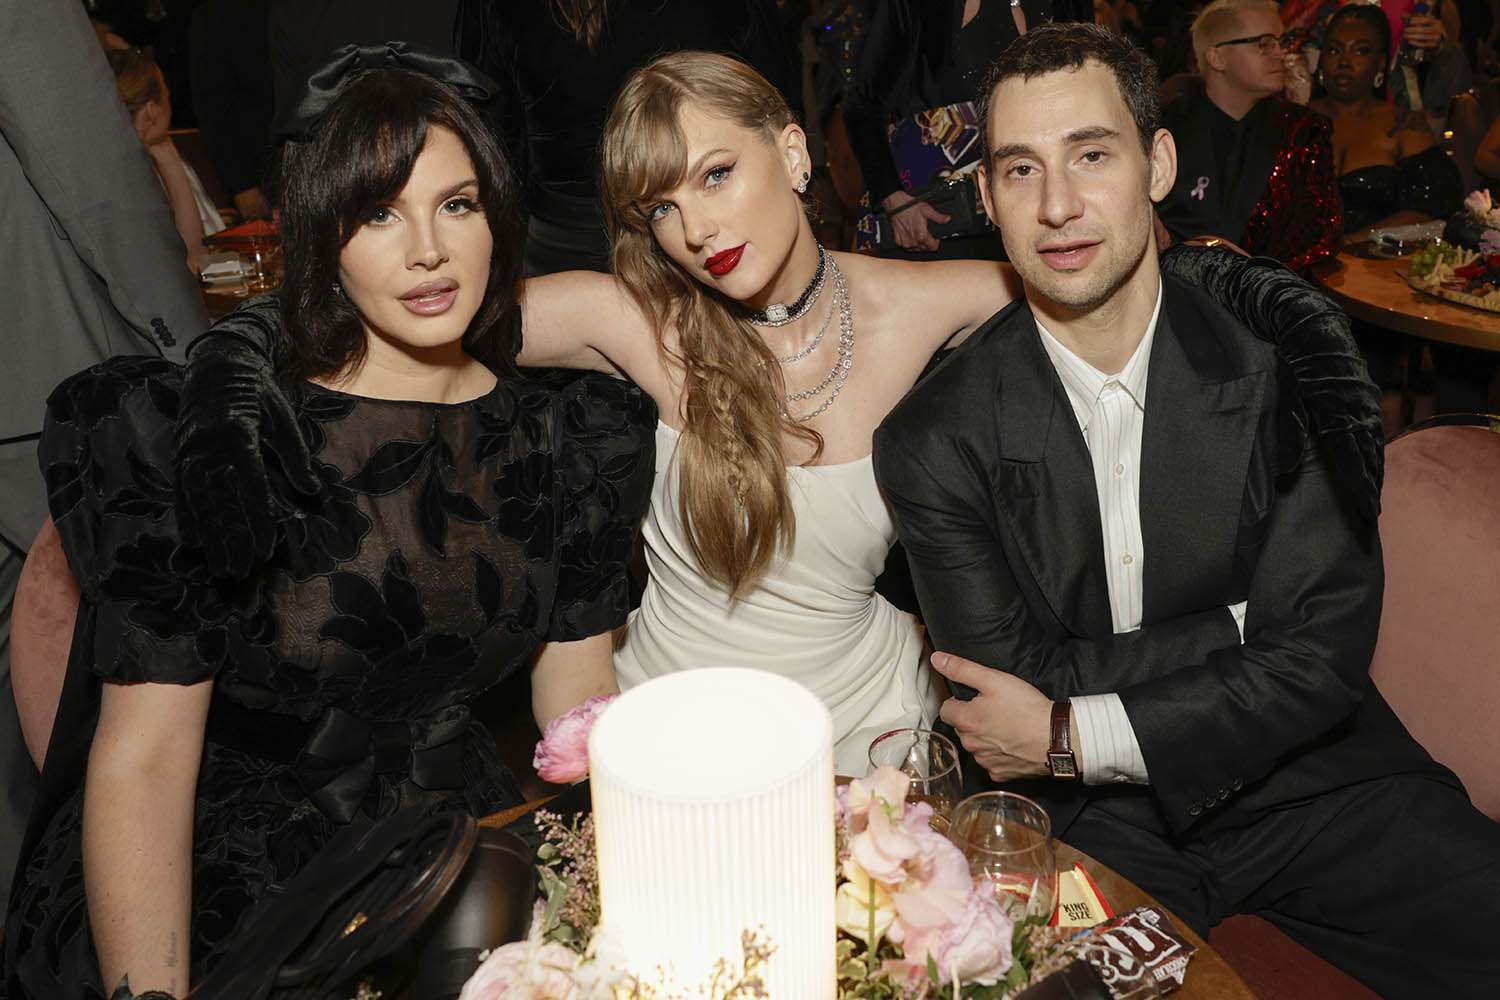 Lana Del Rey, Taylor Swift and Jack Antonoff behind the scenes at The 66th Annual Grammy Awards, airing live from Crypto.com Arena in Los Angeles